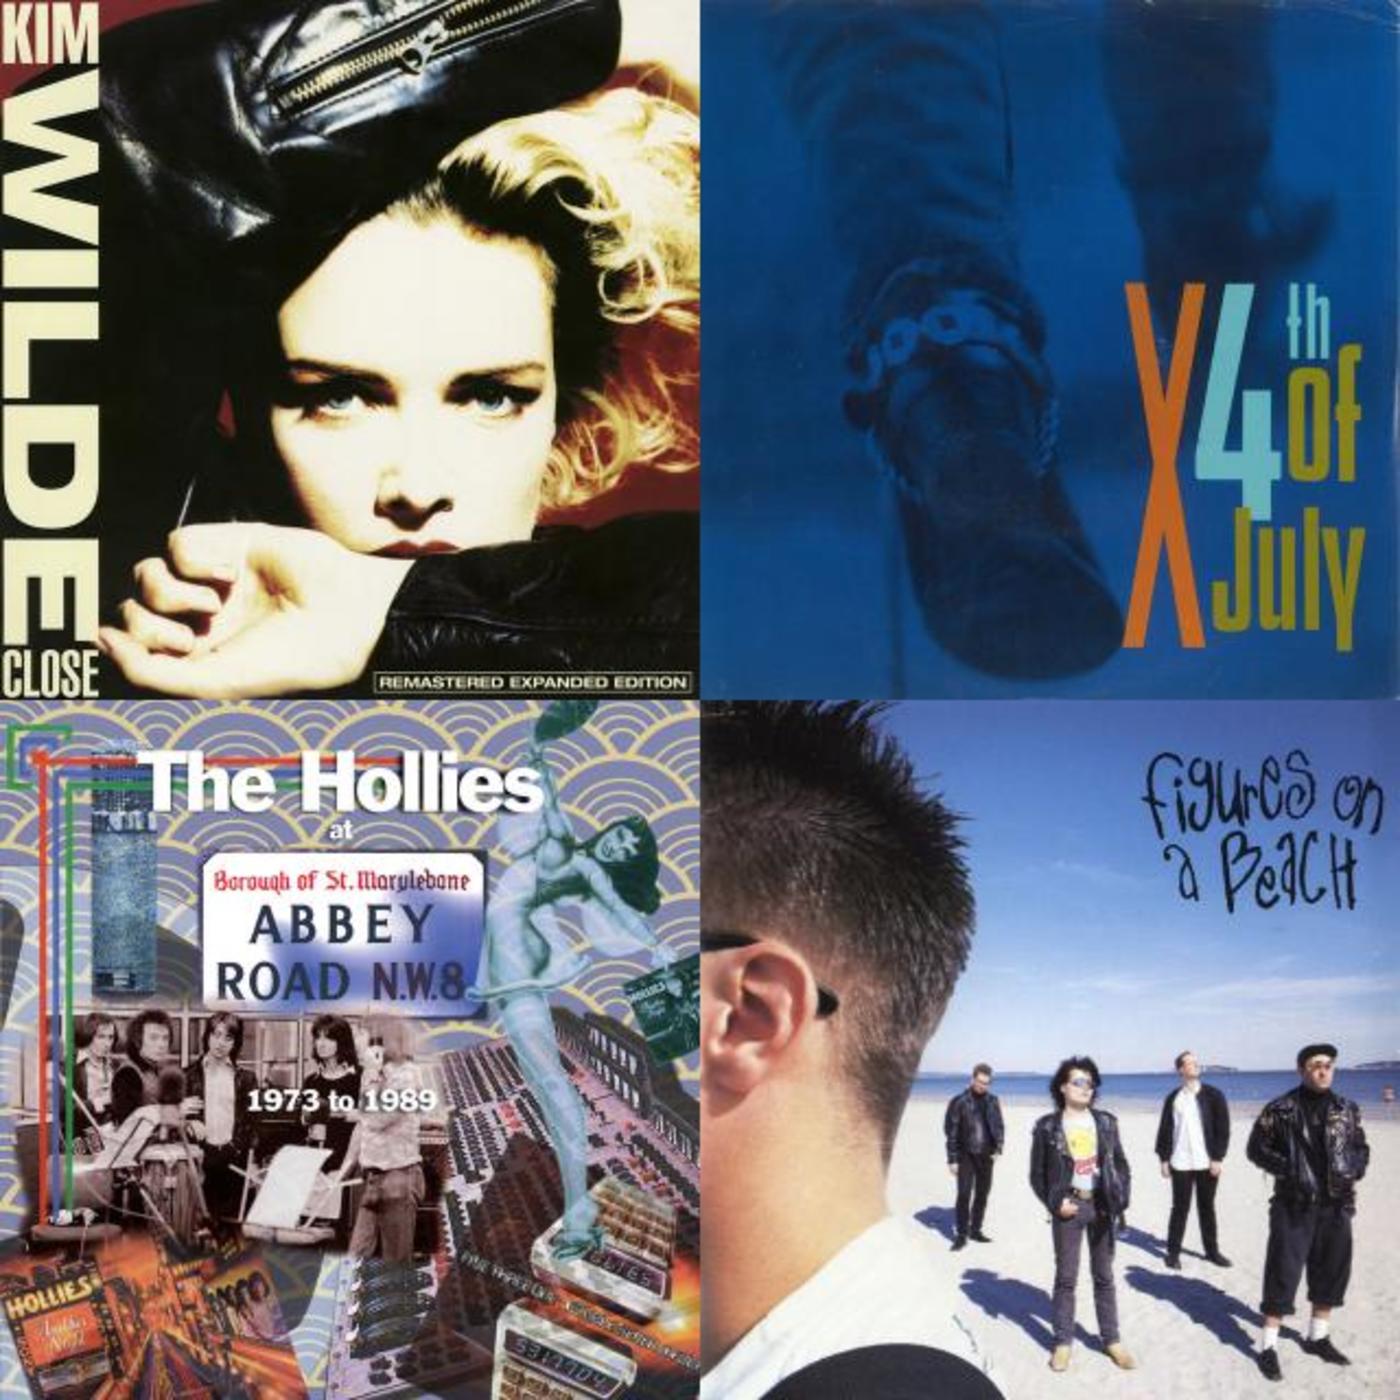 Four for the Fourth - X, The Hollies, Figures On A Beach, Simply Red, Kim Wilde, Devo, Prince, Madonna, Chicago, George Benson, Color Me Badd, The Veronicas, Emmy Rossum, The Smiths